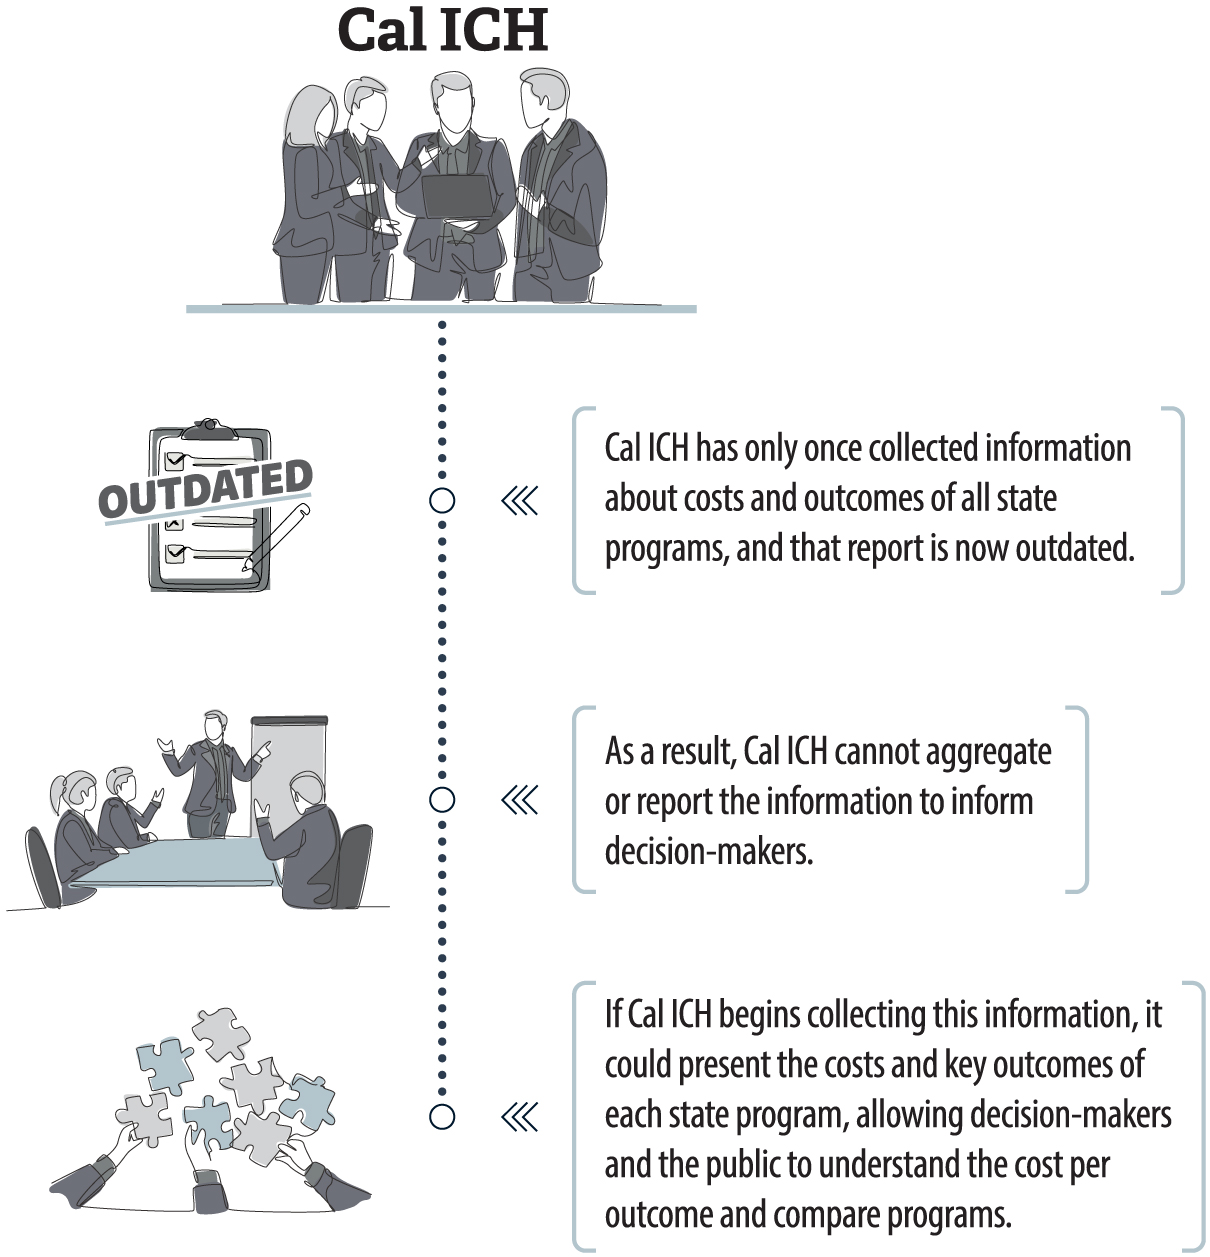 Figure 4, a figure with images and text summarizing Cal ICH's actions that have limited its evaluation of state programs' effectiveness.